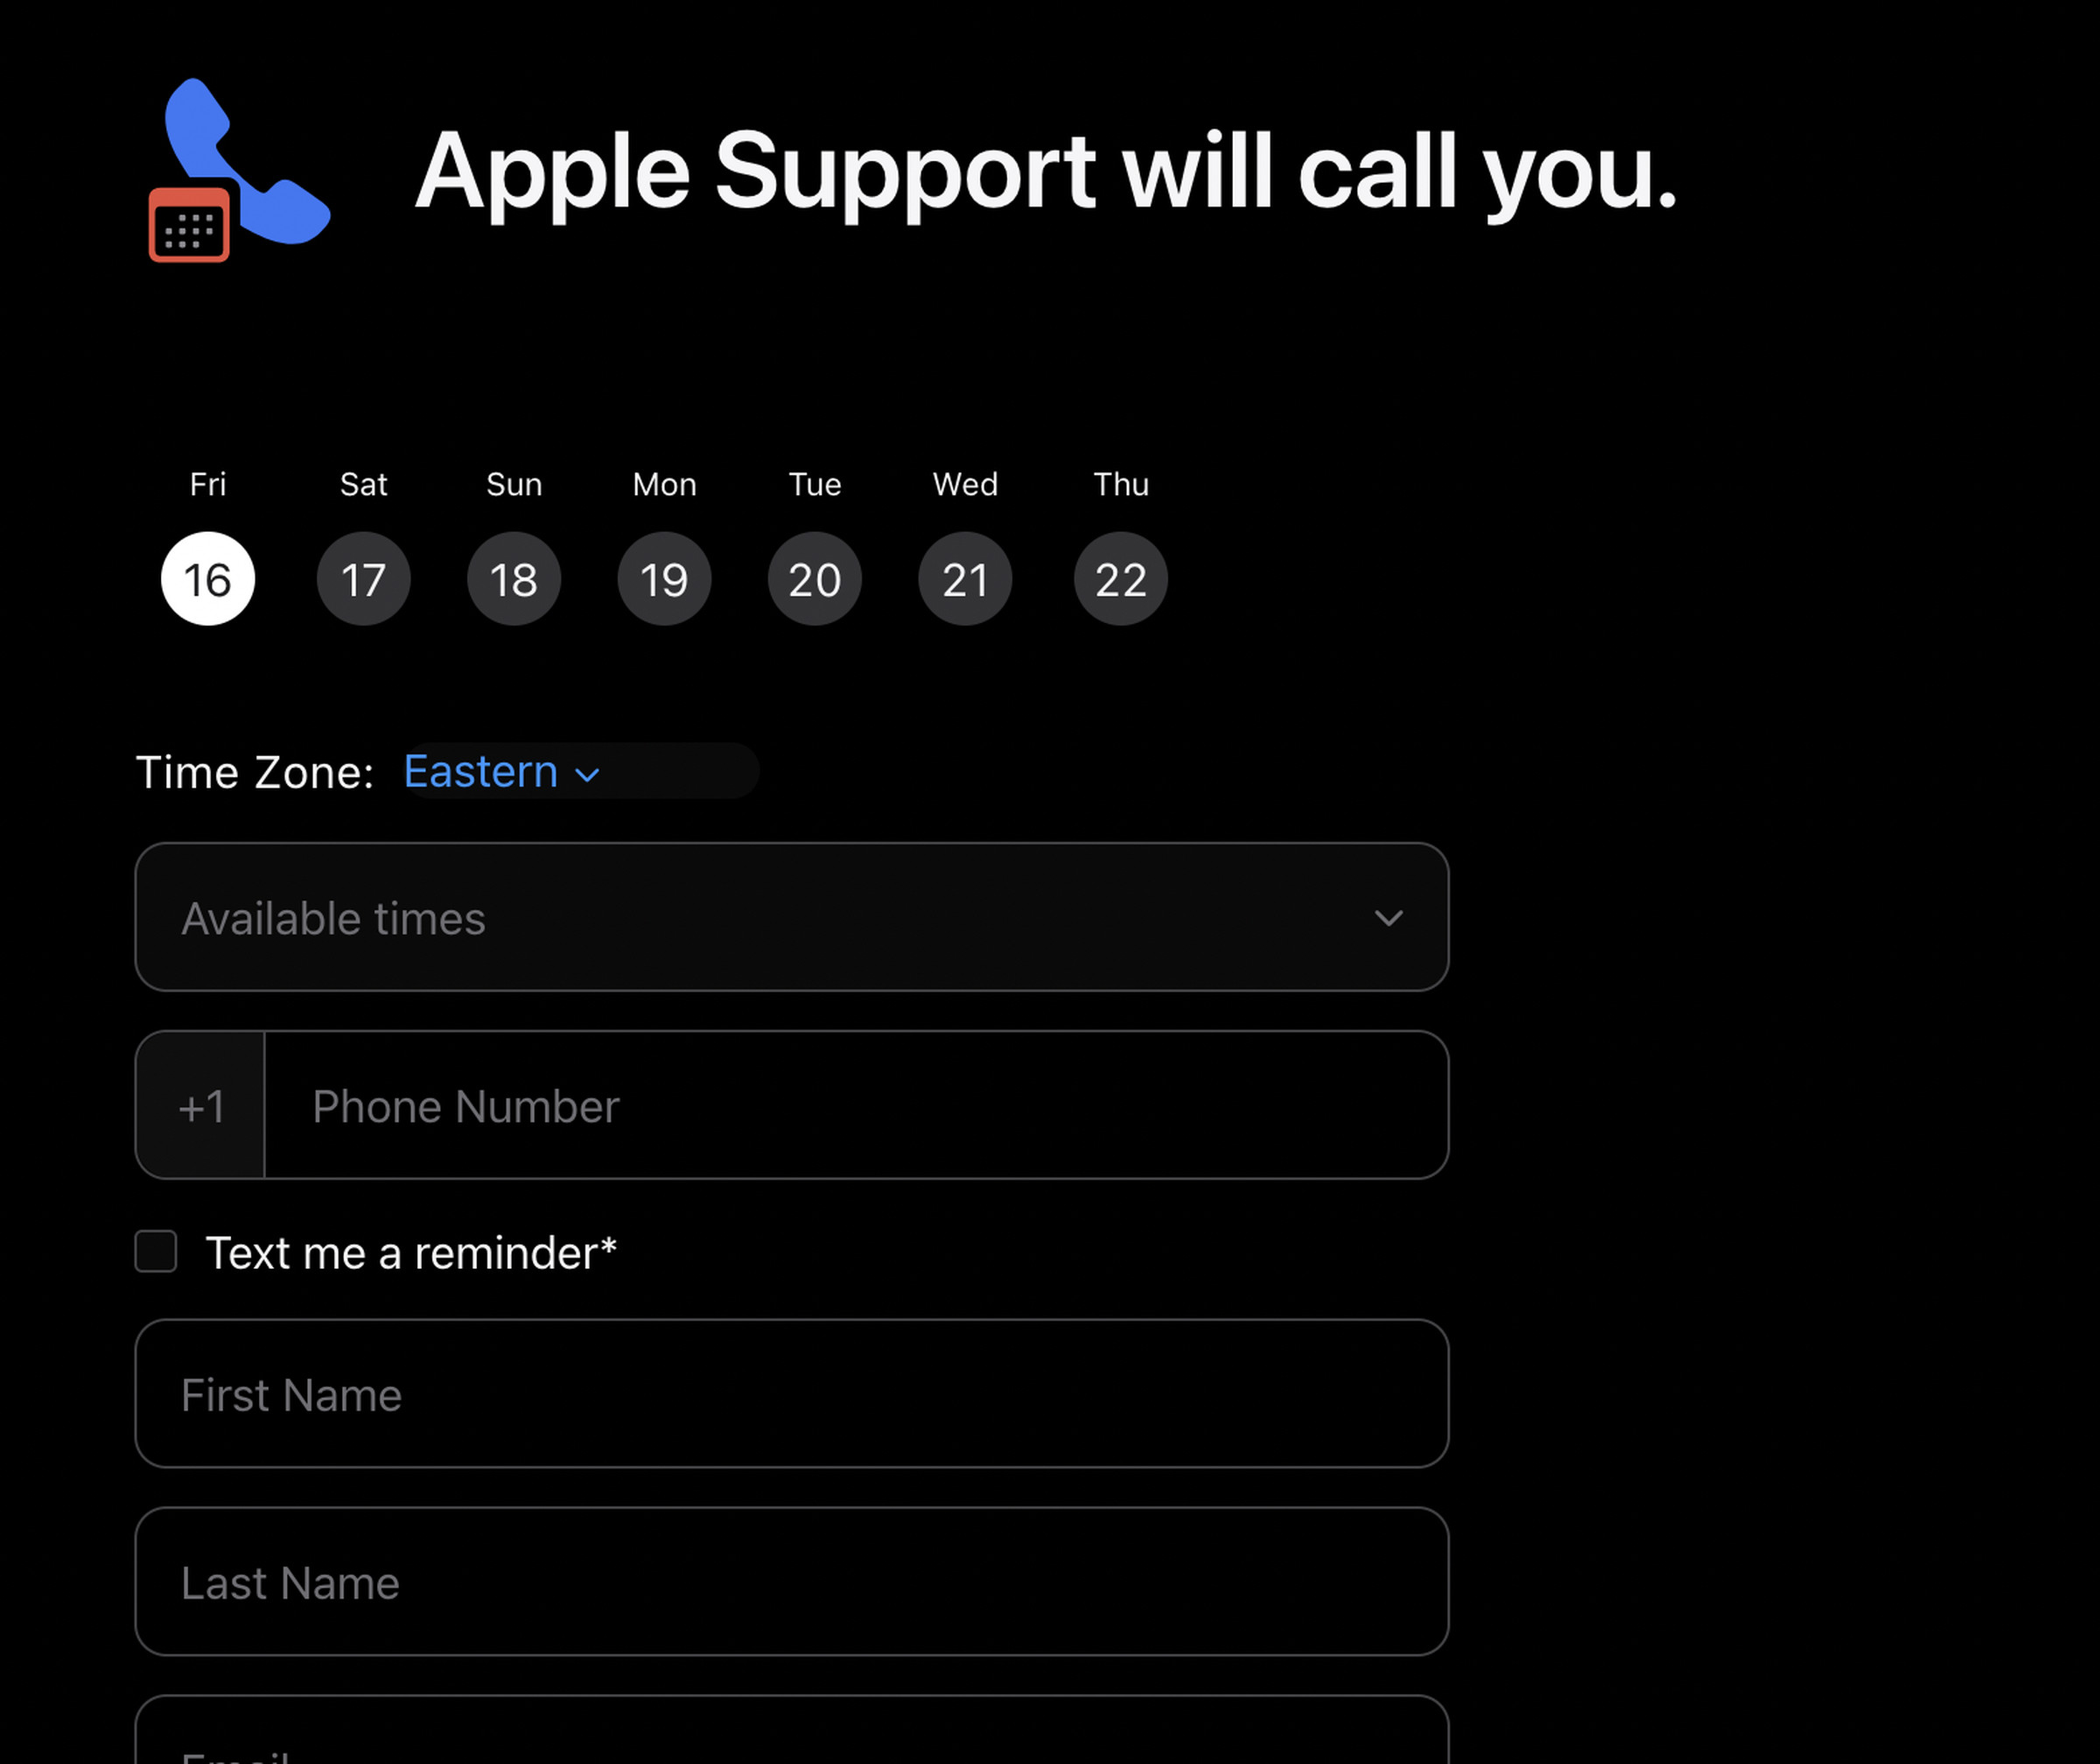 The dialogue for scheduling an Apple Support call.